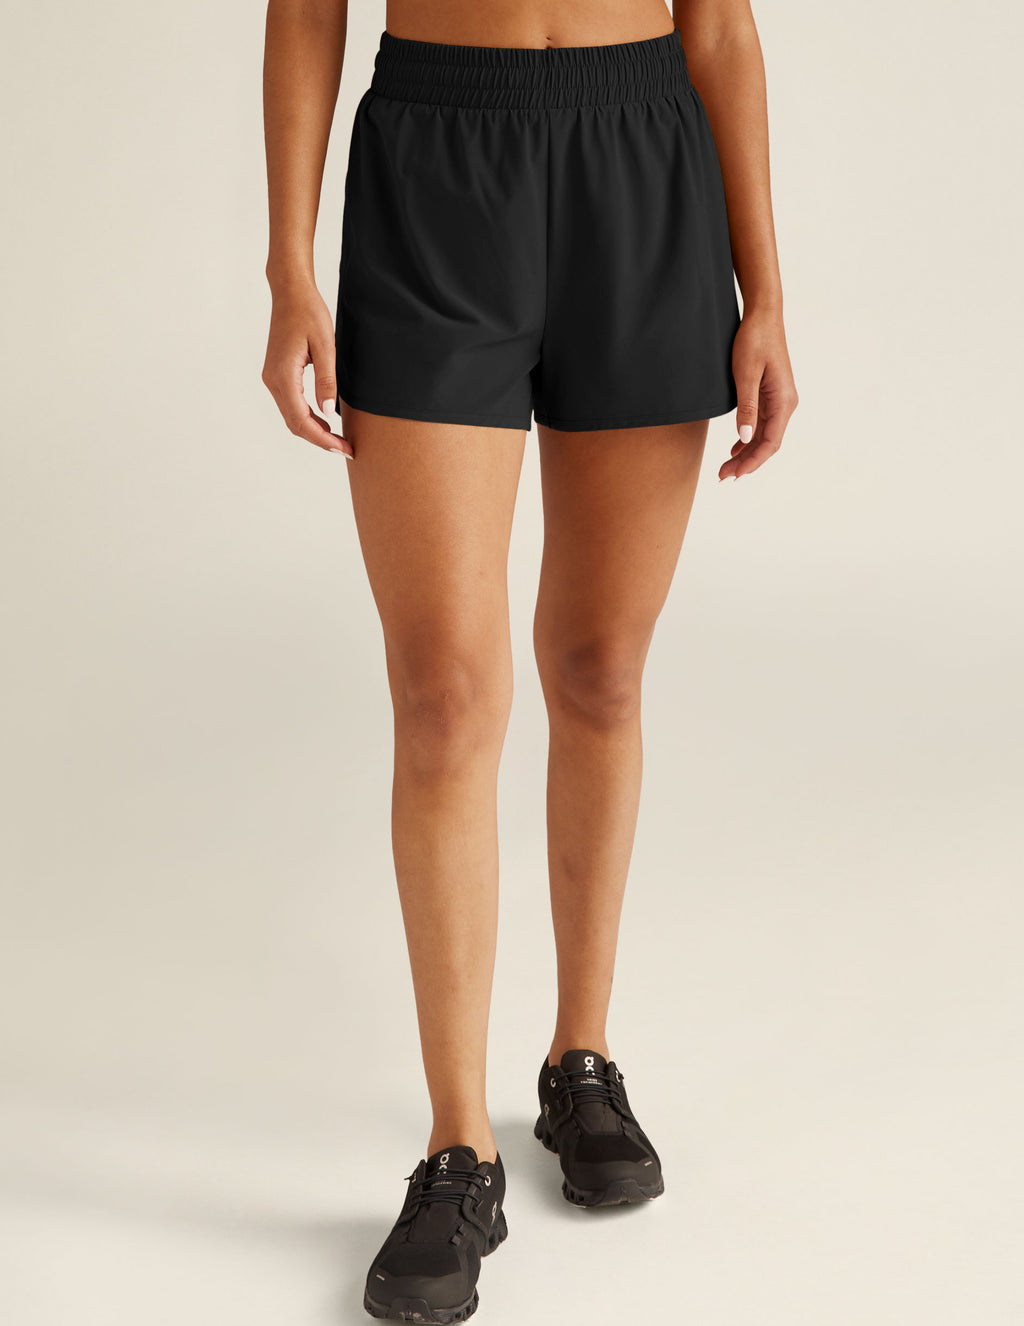 Stretch Woven In Stride Lined Short Featured Image